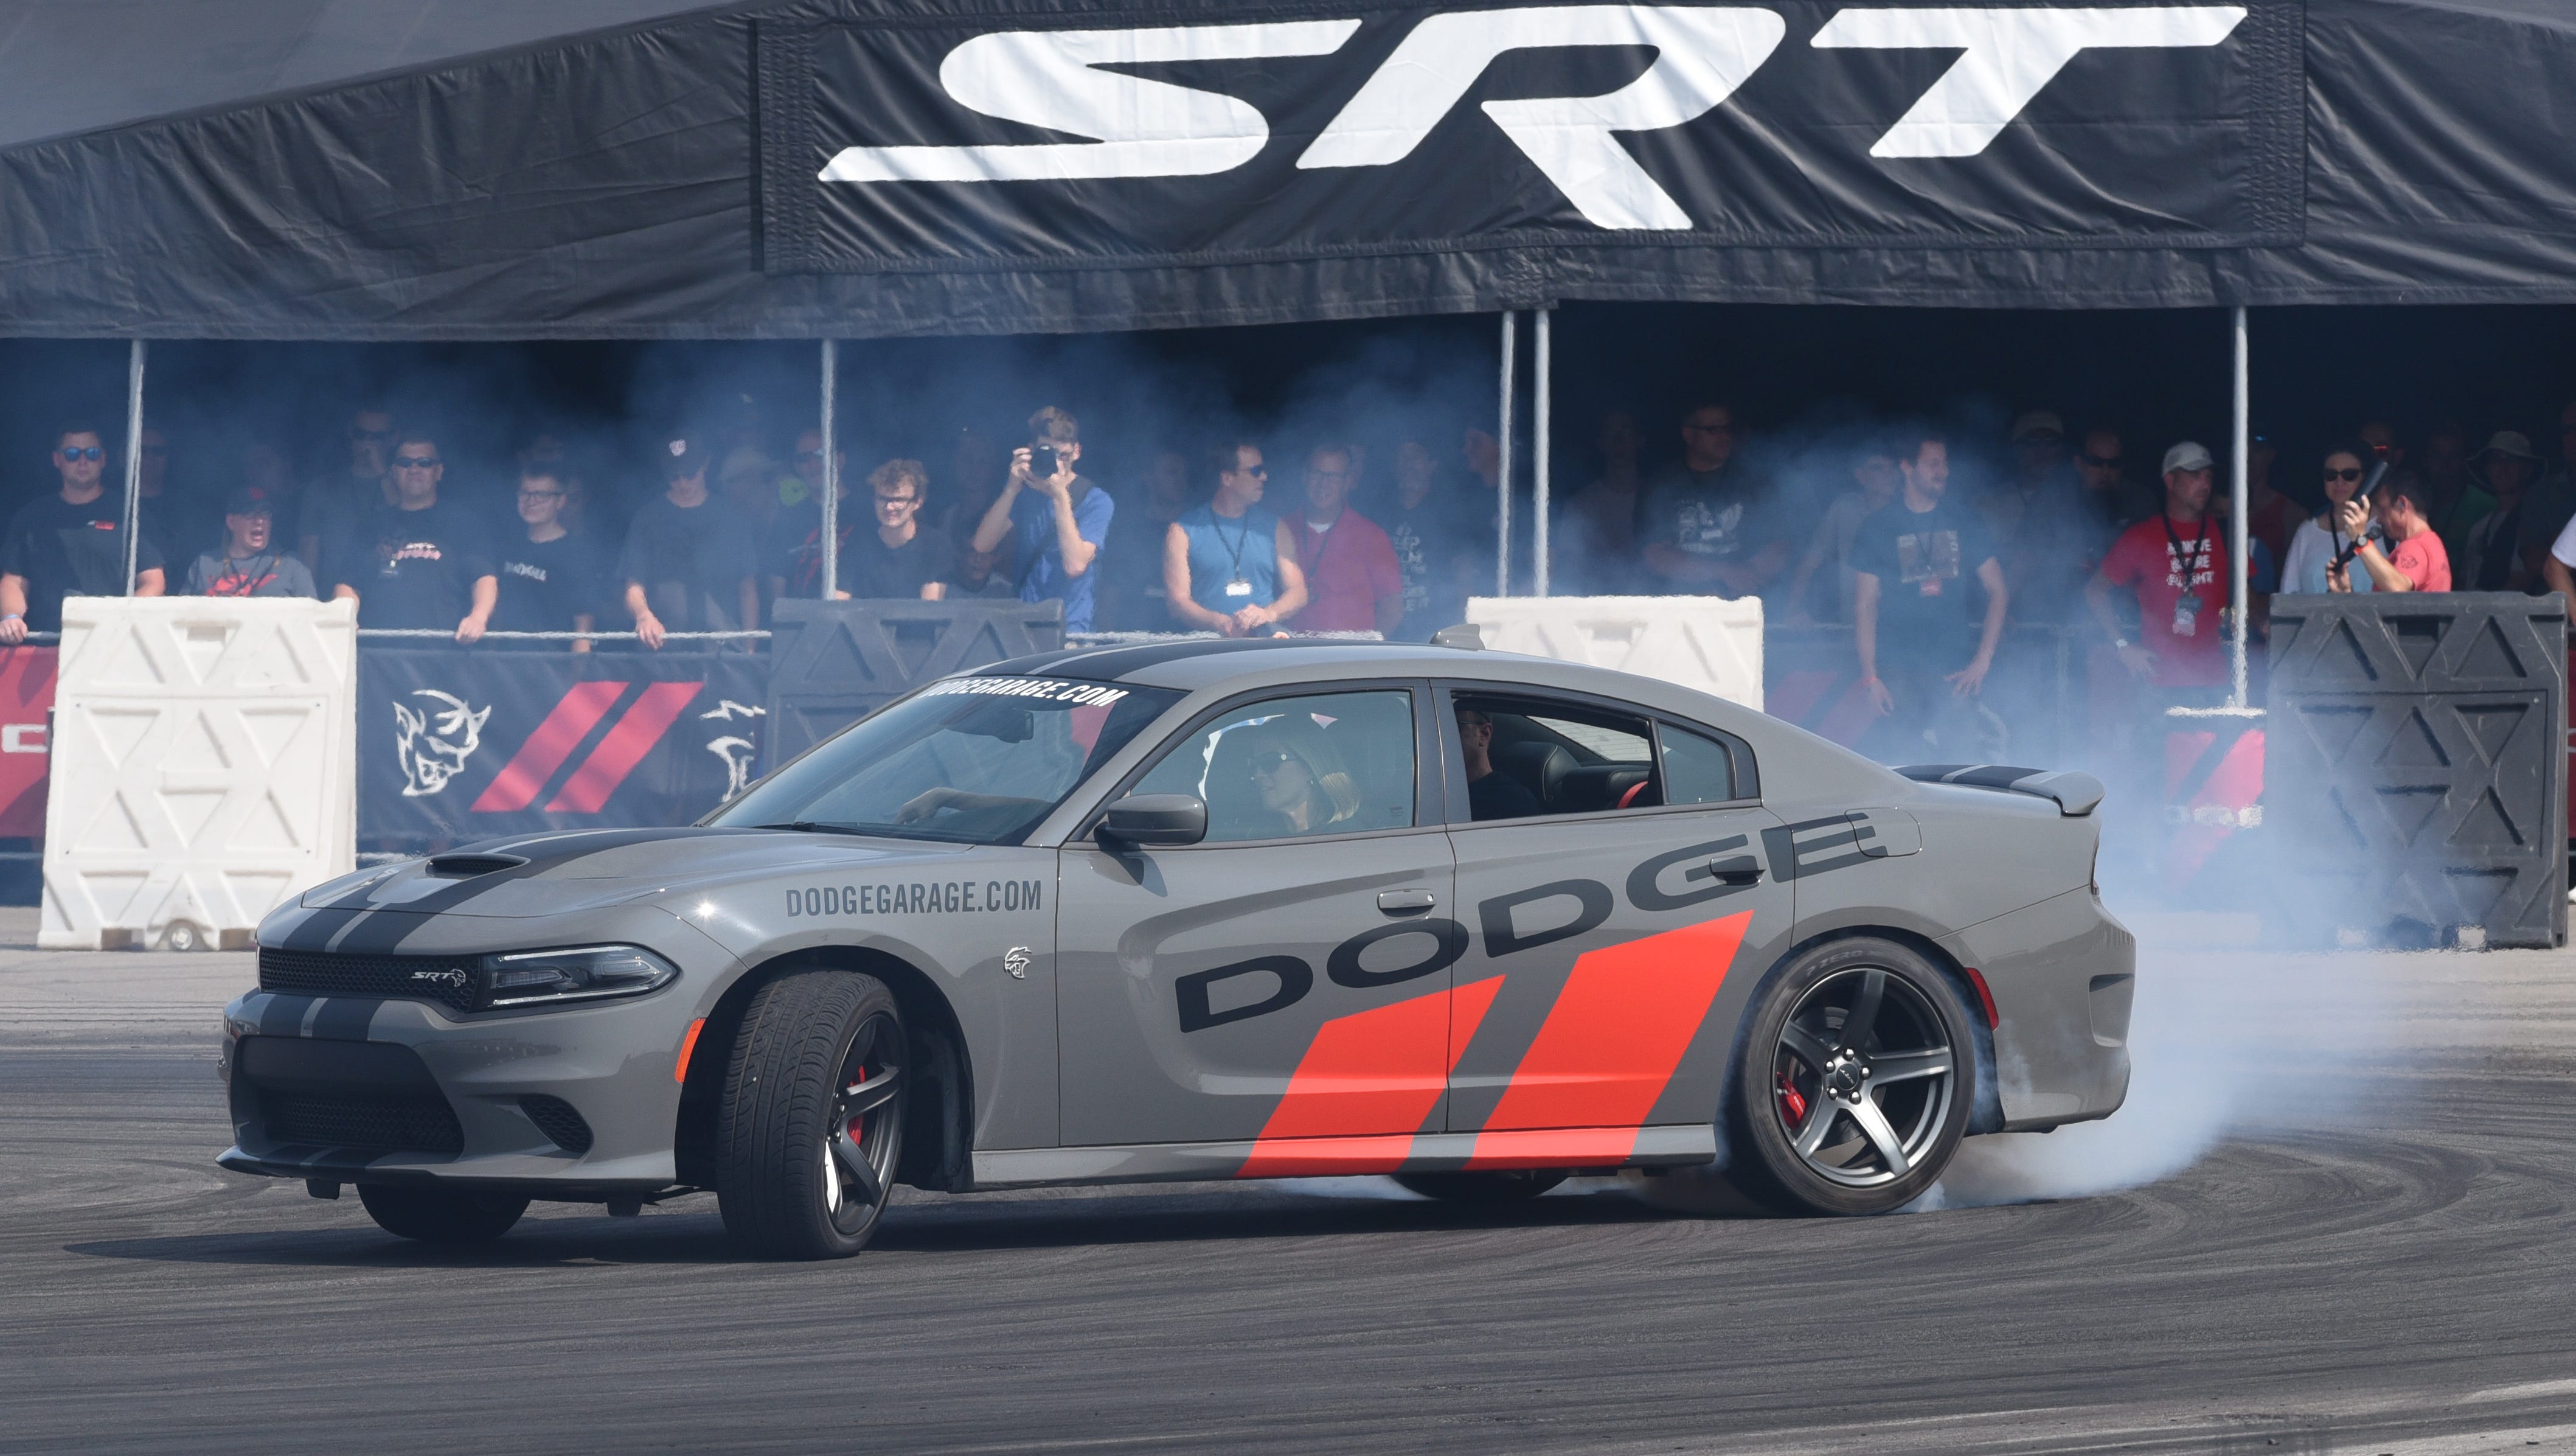 Fans watch the Dodge Charger during a drift ride.